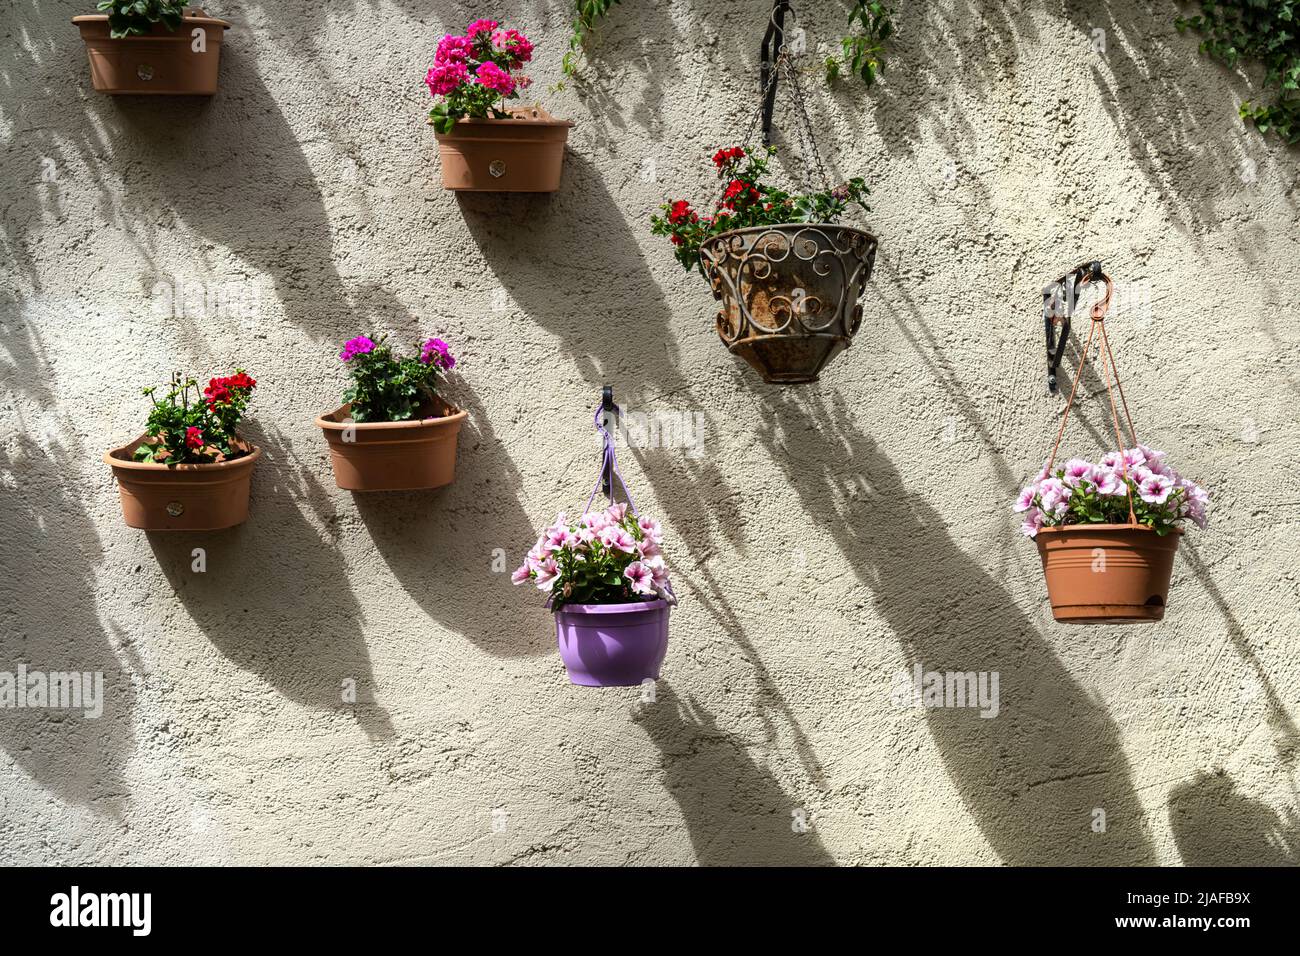 Luxembourg city, May 2022.  flower pots hanging on the wall Stock Photo